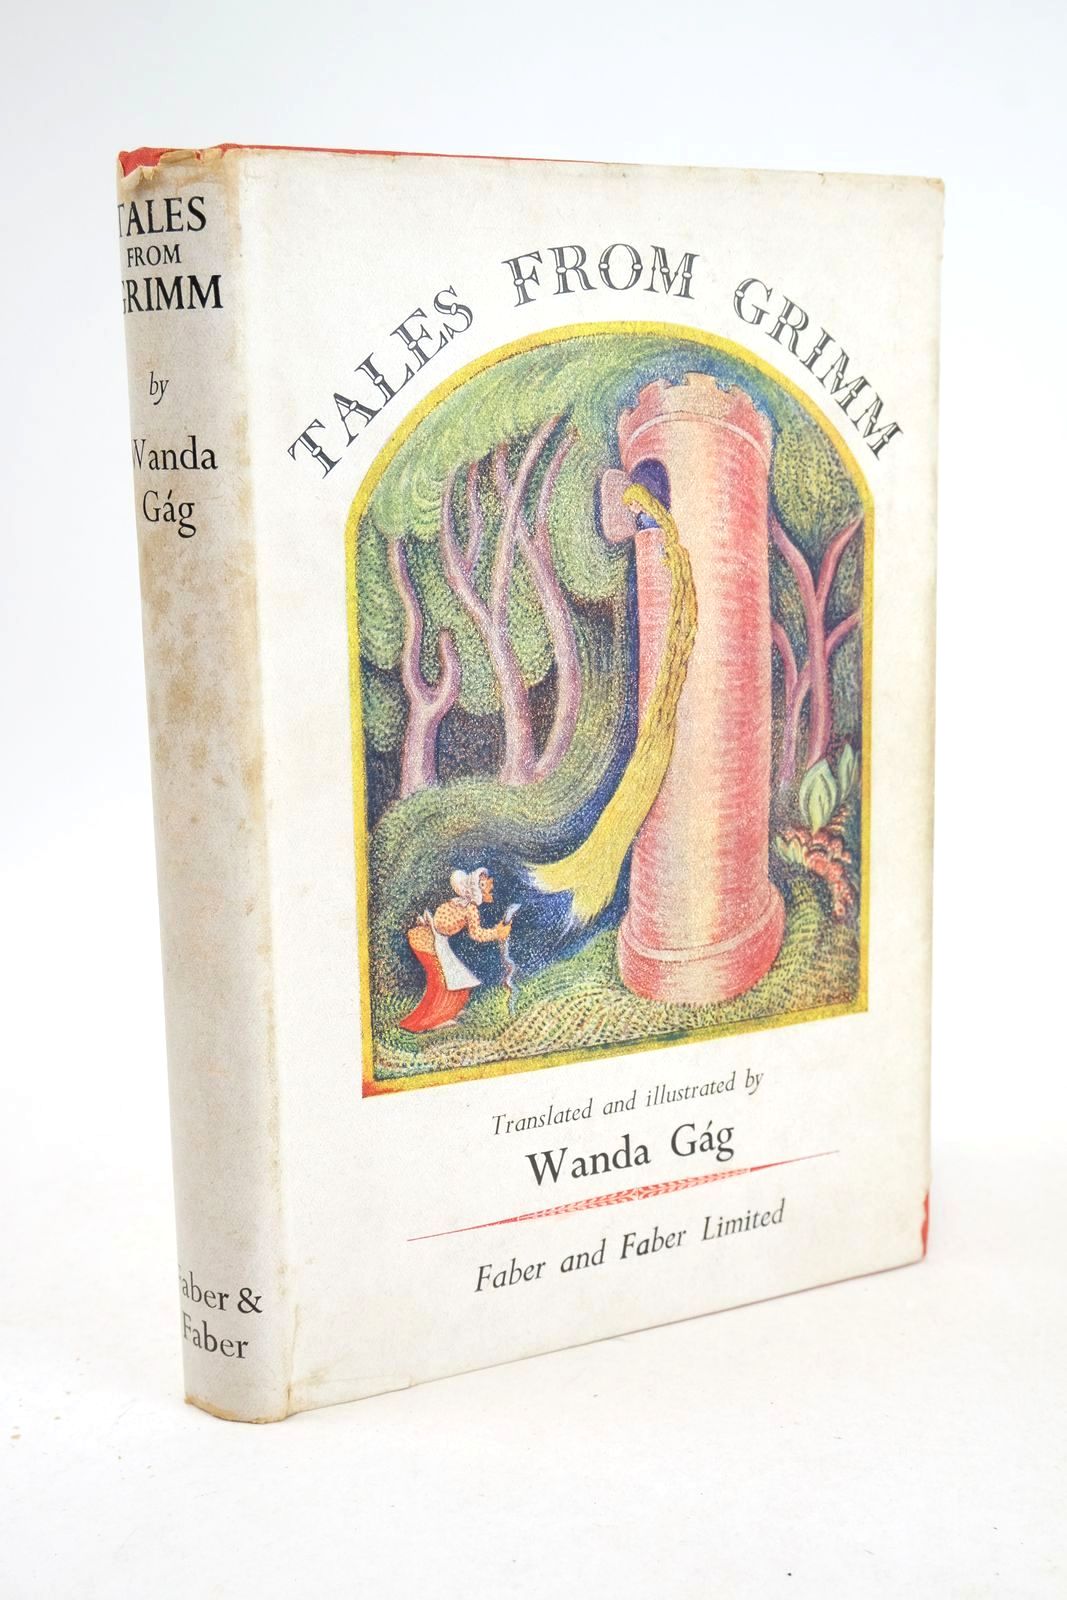 Photo of TALES FROM GRIMM written by Grimm, Brothers Gag, Wanda illustrated by Gag, Wanda published by Faber &amp; Faber Limited (STOCK CODE: 1325910)  for sale by Stella & Rose's Books